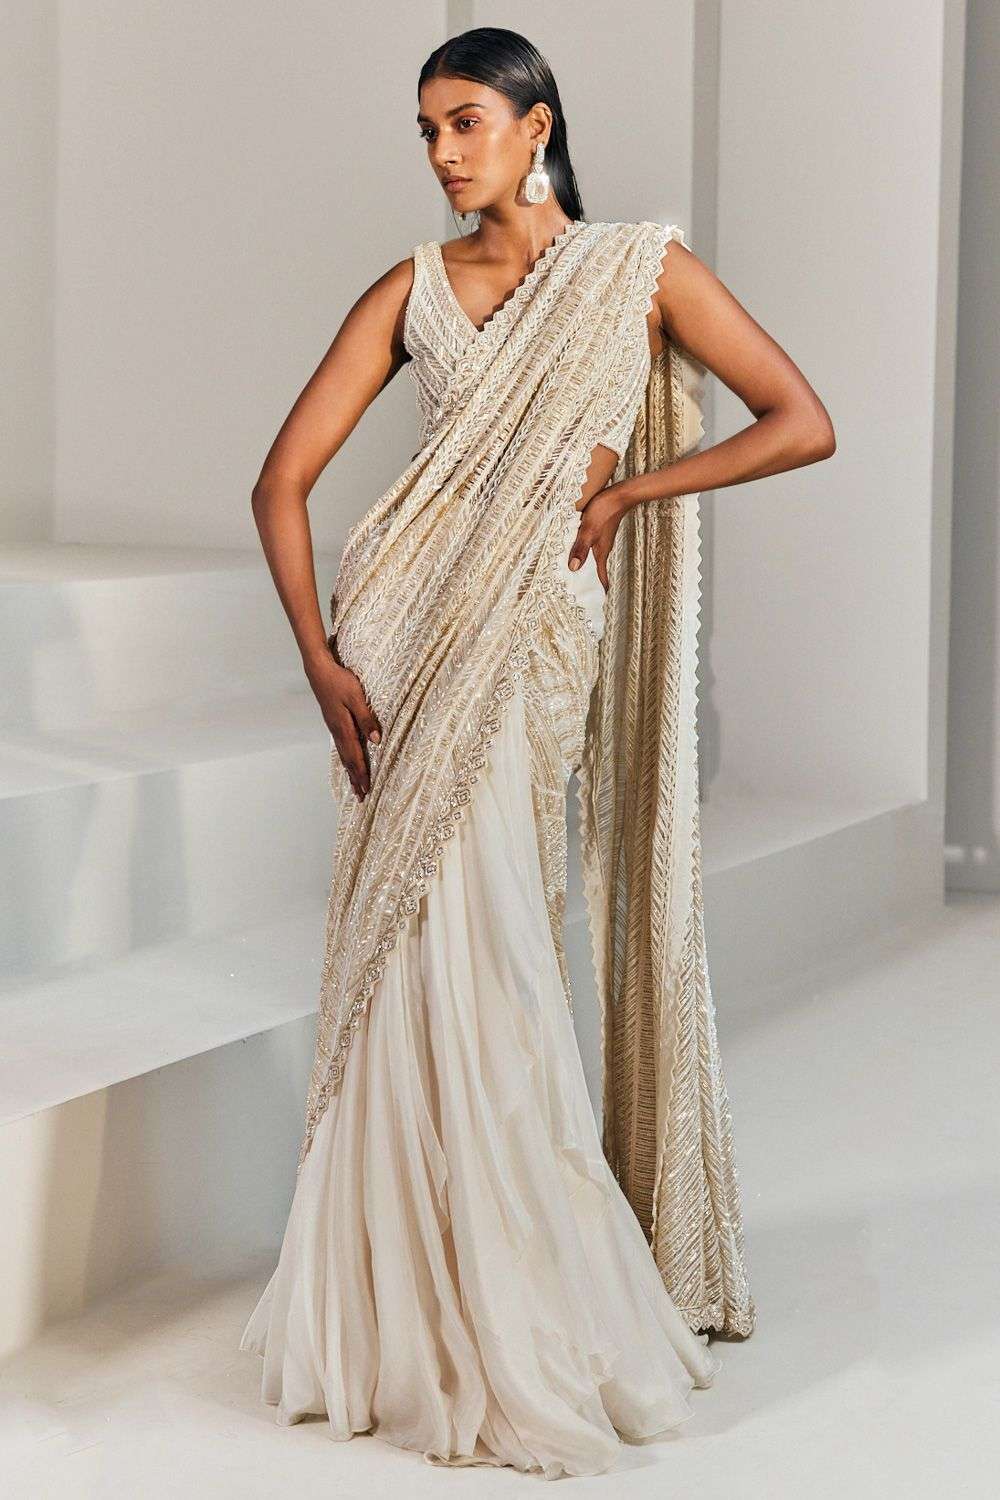 GOLD PRE STITCHED DRAPED SAREE WITH A HAND EMBROIDERED BLOUSE, EMBOSSED  FABRIC PALLU AND A SHOULDER BROACH DETAIL. - Seasons India